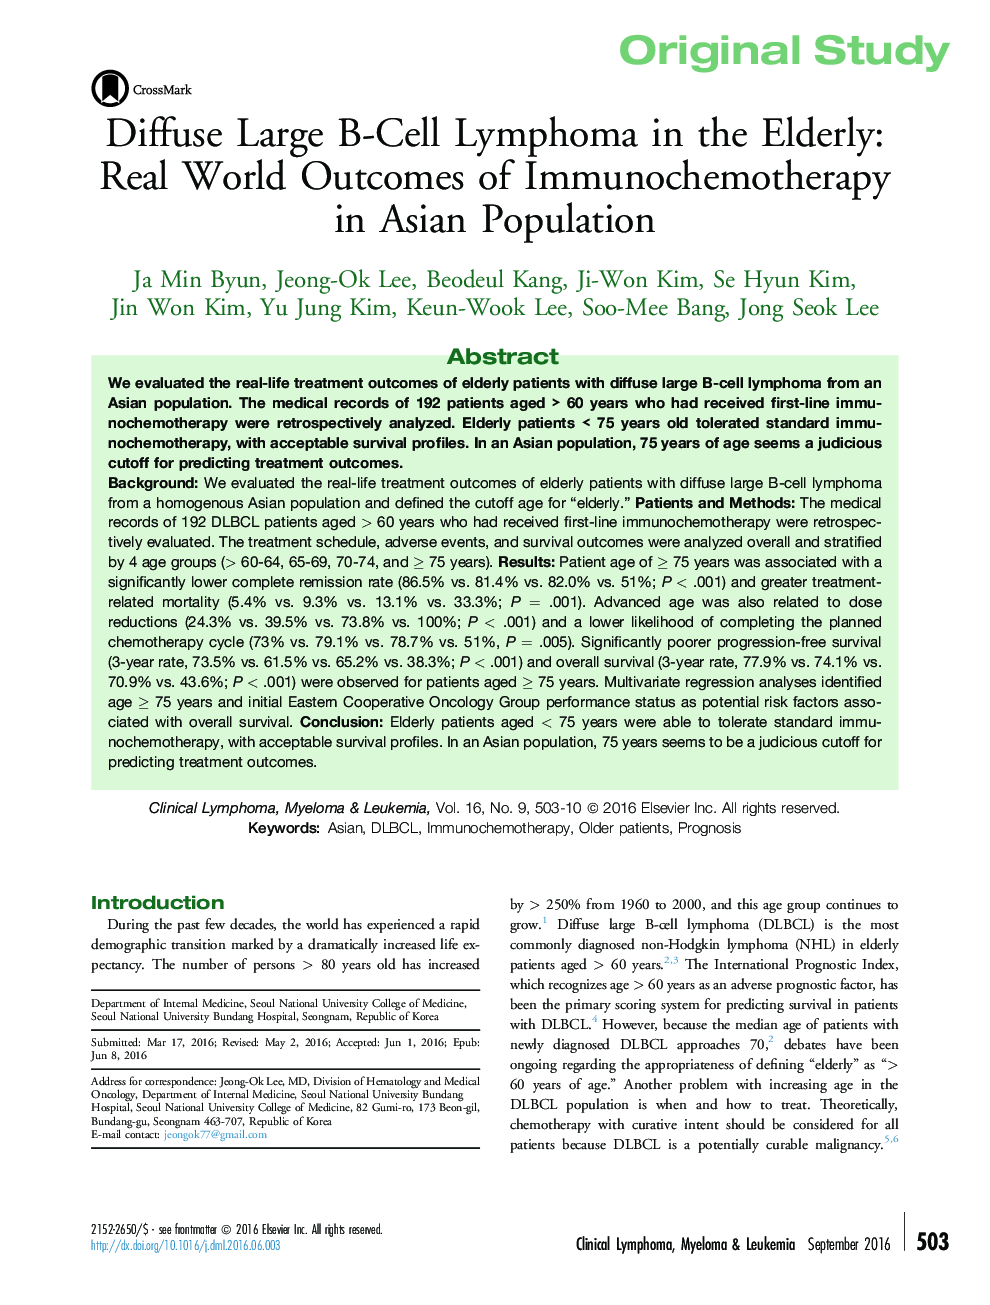 Diffuse Large B-Cell Lymphoma in the Elderly: Real World Outcomes of Immunochemotherapy in Asian Population